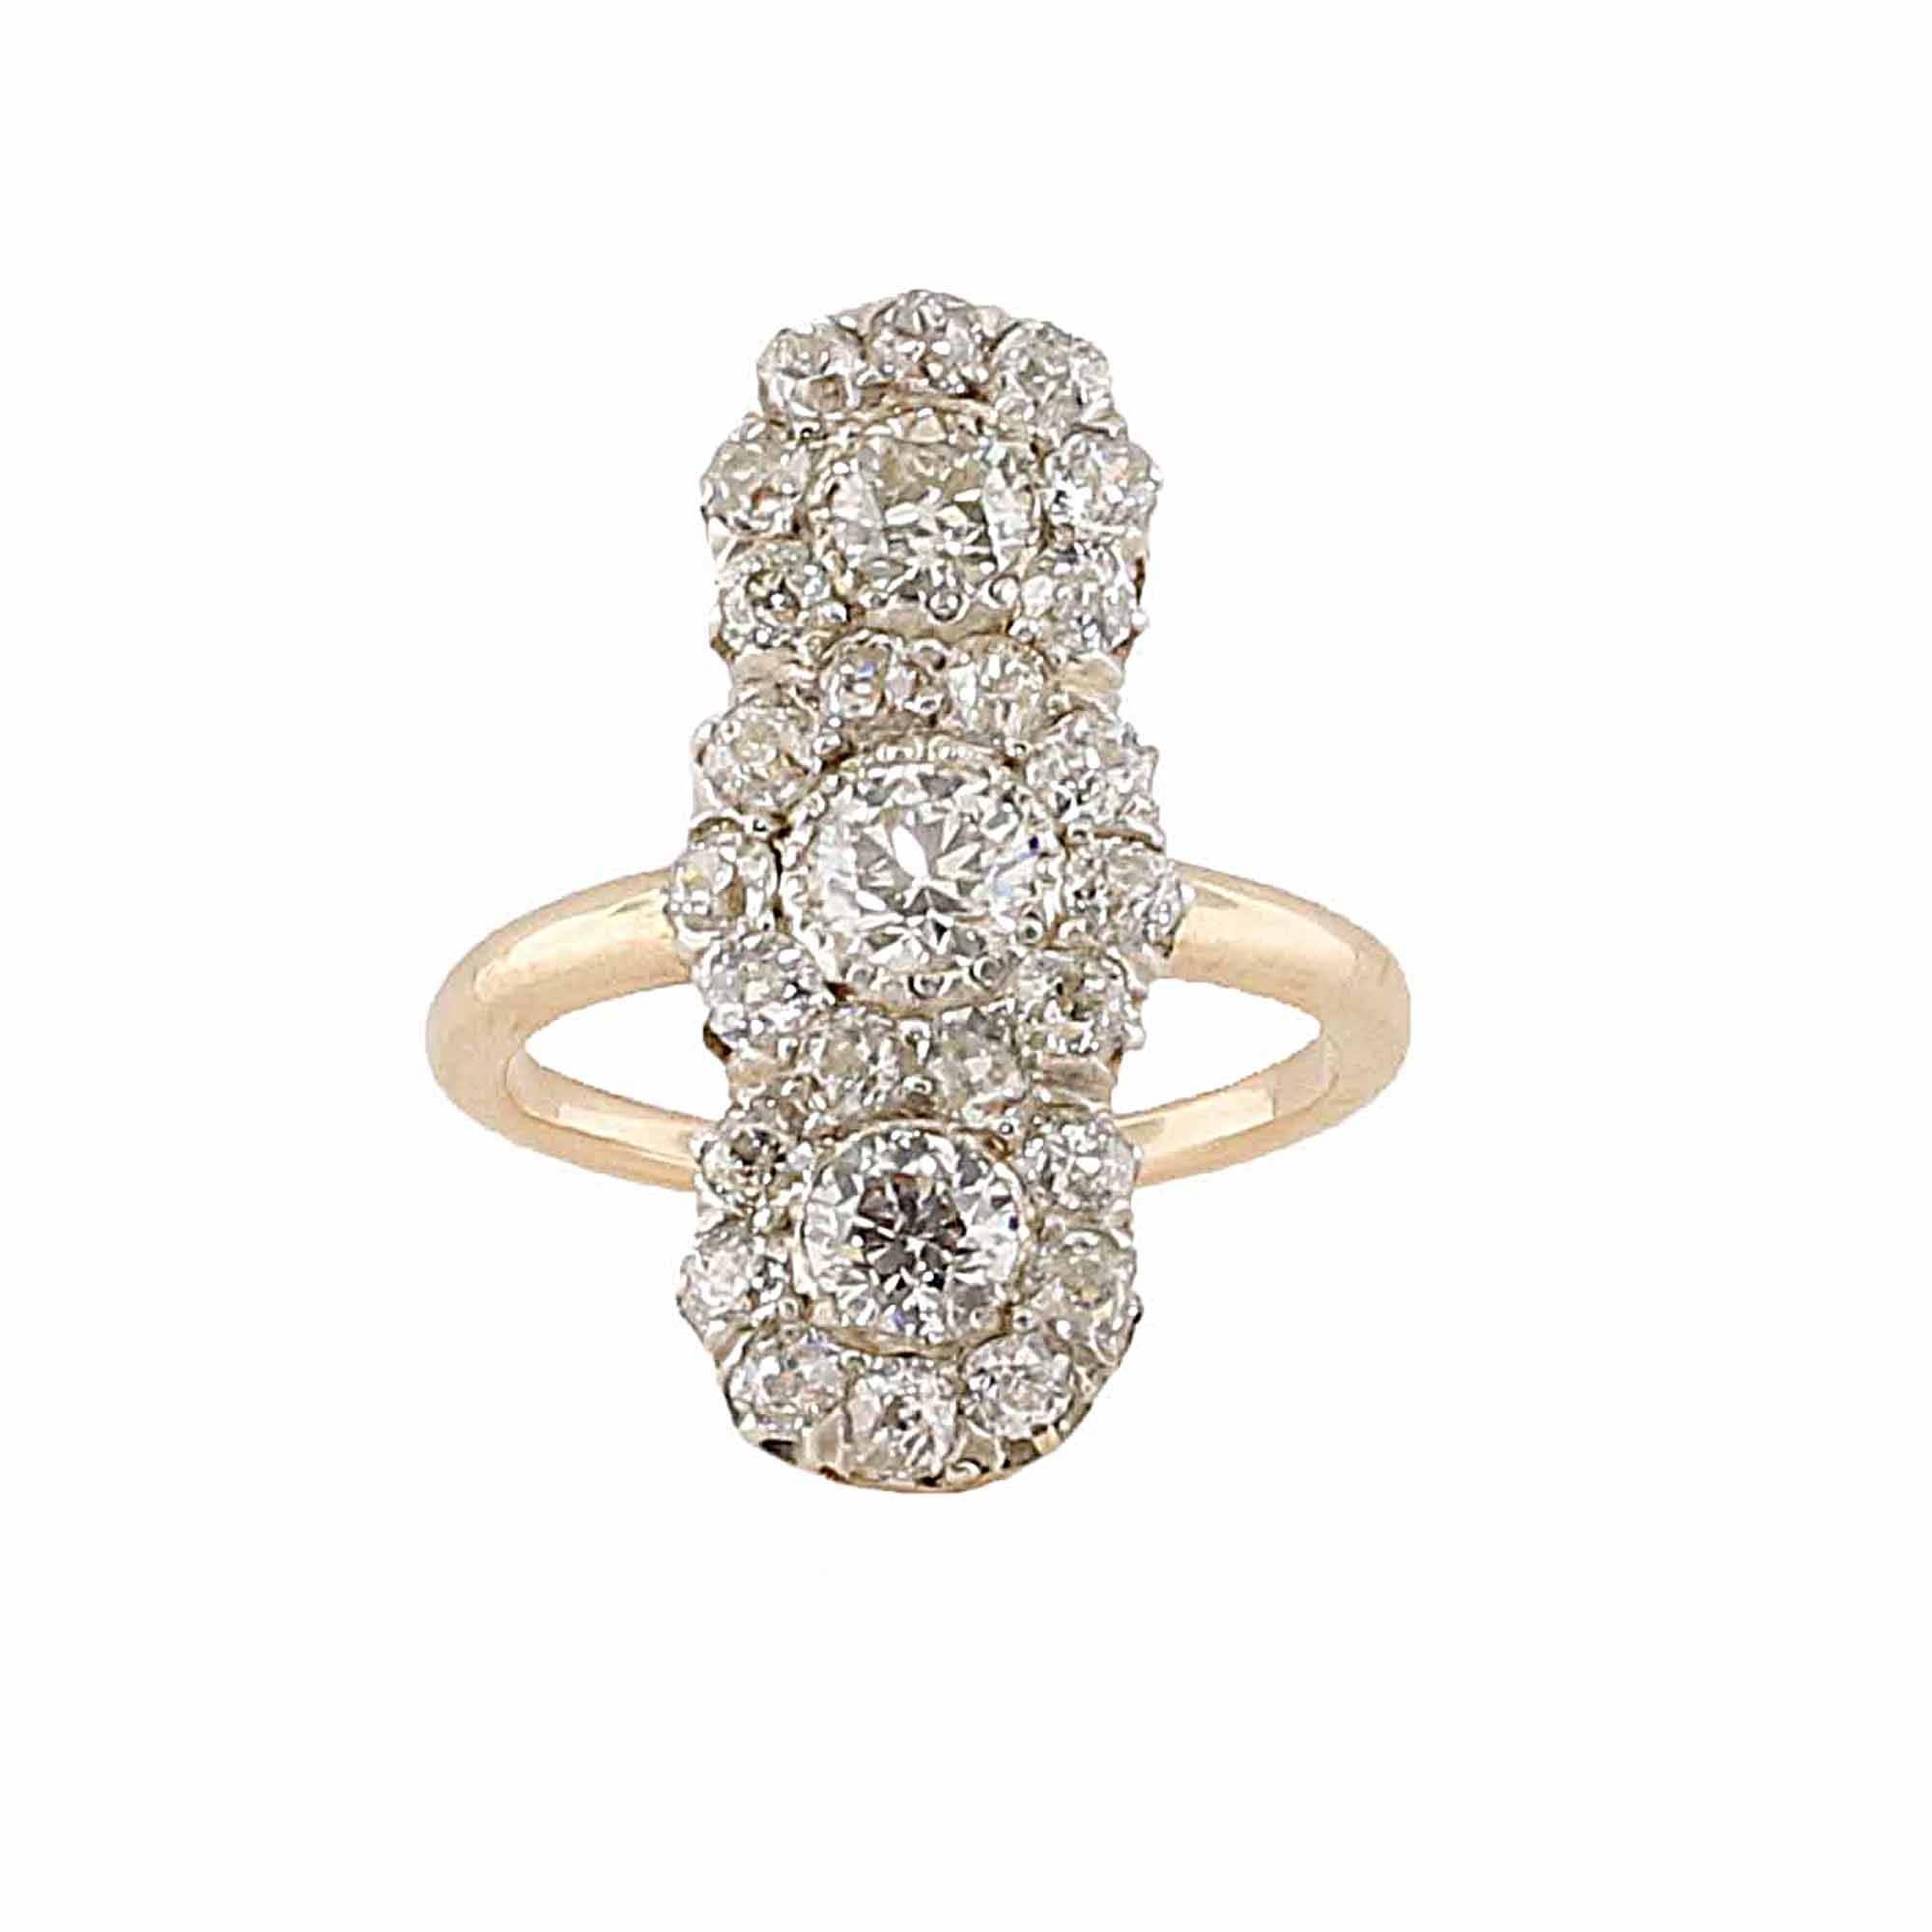 Gorgeous one of a kind, show stopping 3 stone diamond ring. 3 larger diamonds surrounded by smaller rounds make this ring something special. The length of the ring also makes it extremely unique. Size 4. Ring can be sized to a 5 at no cost to the